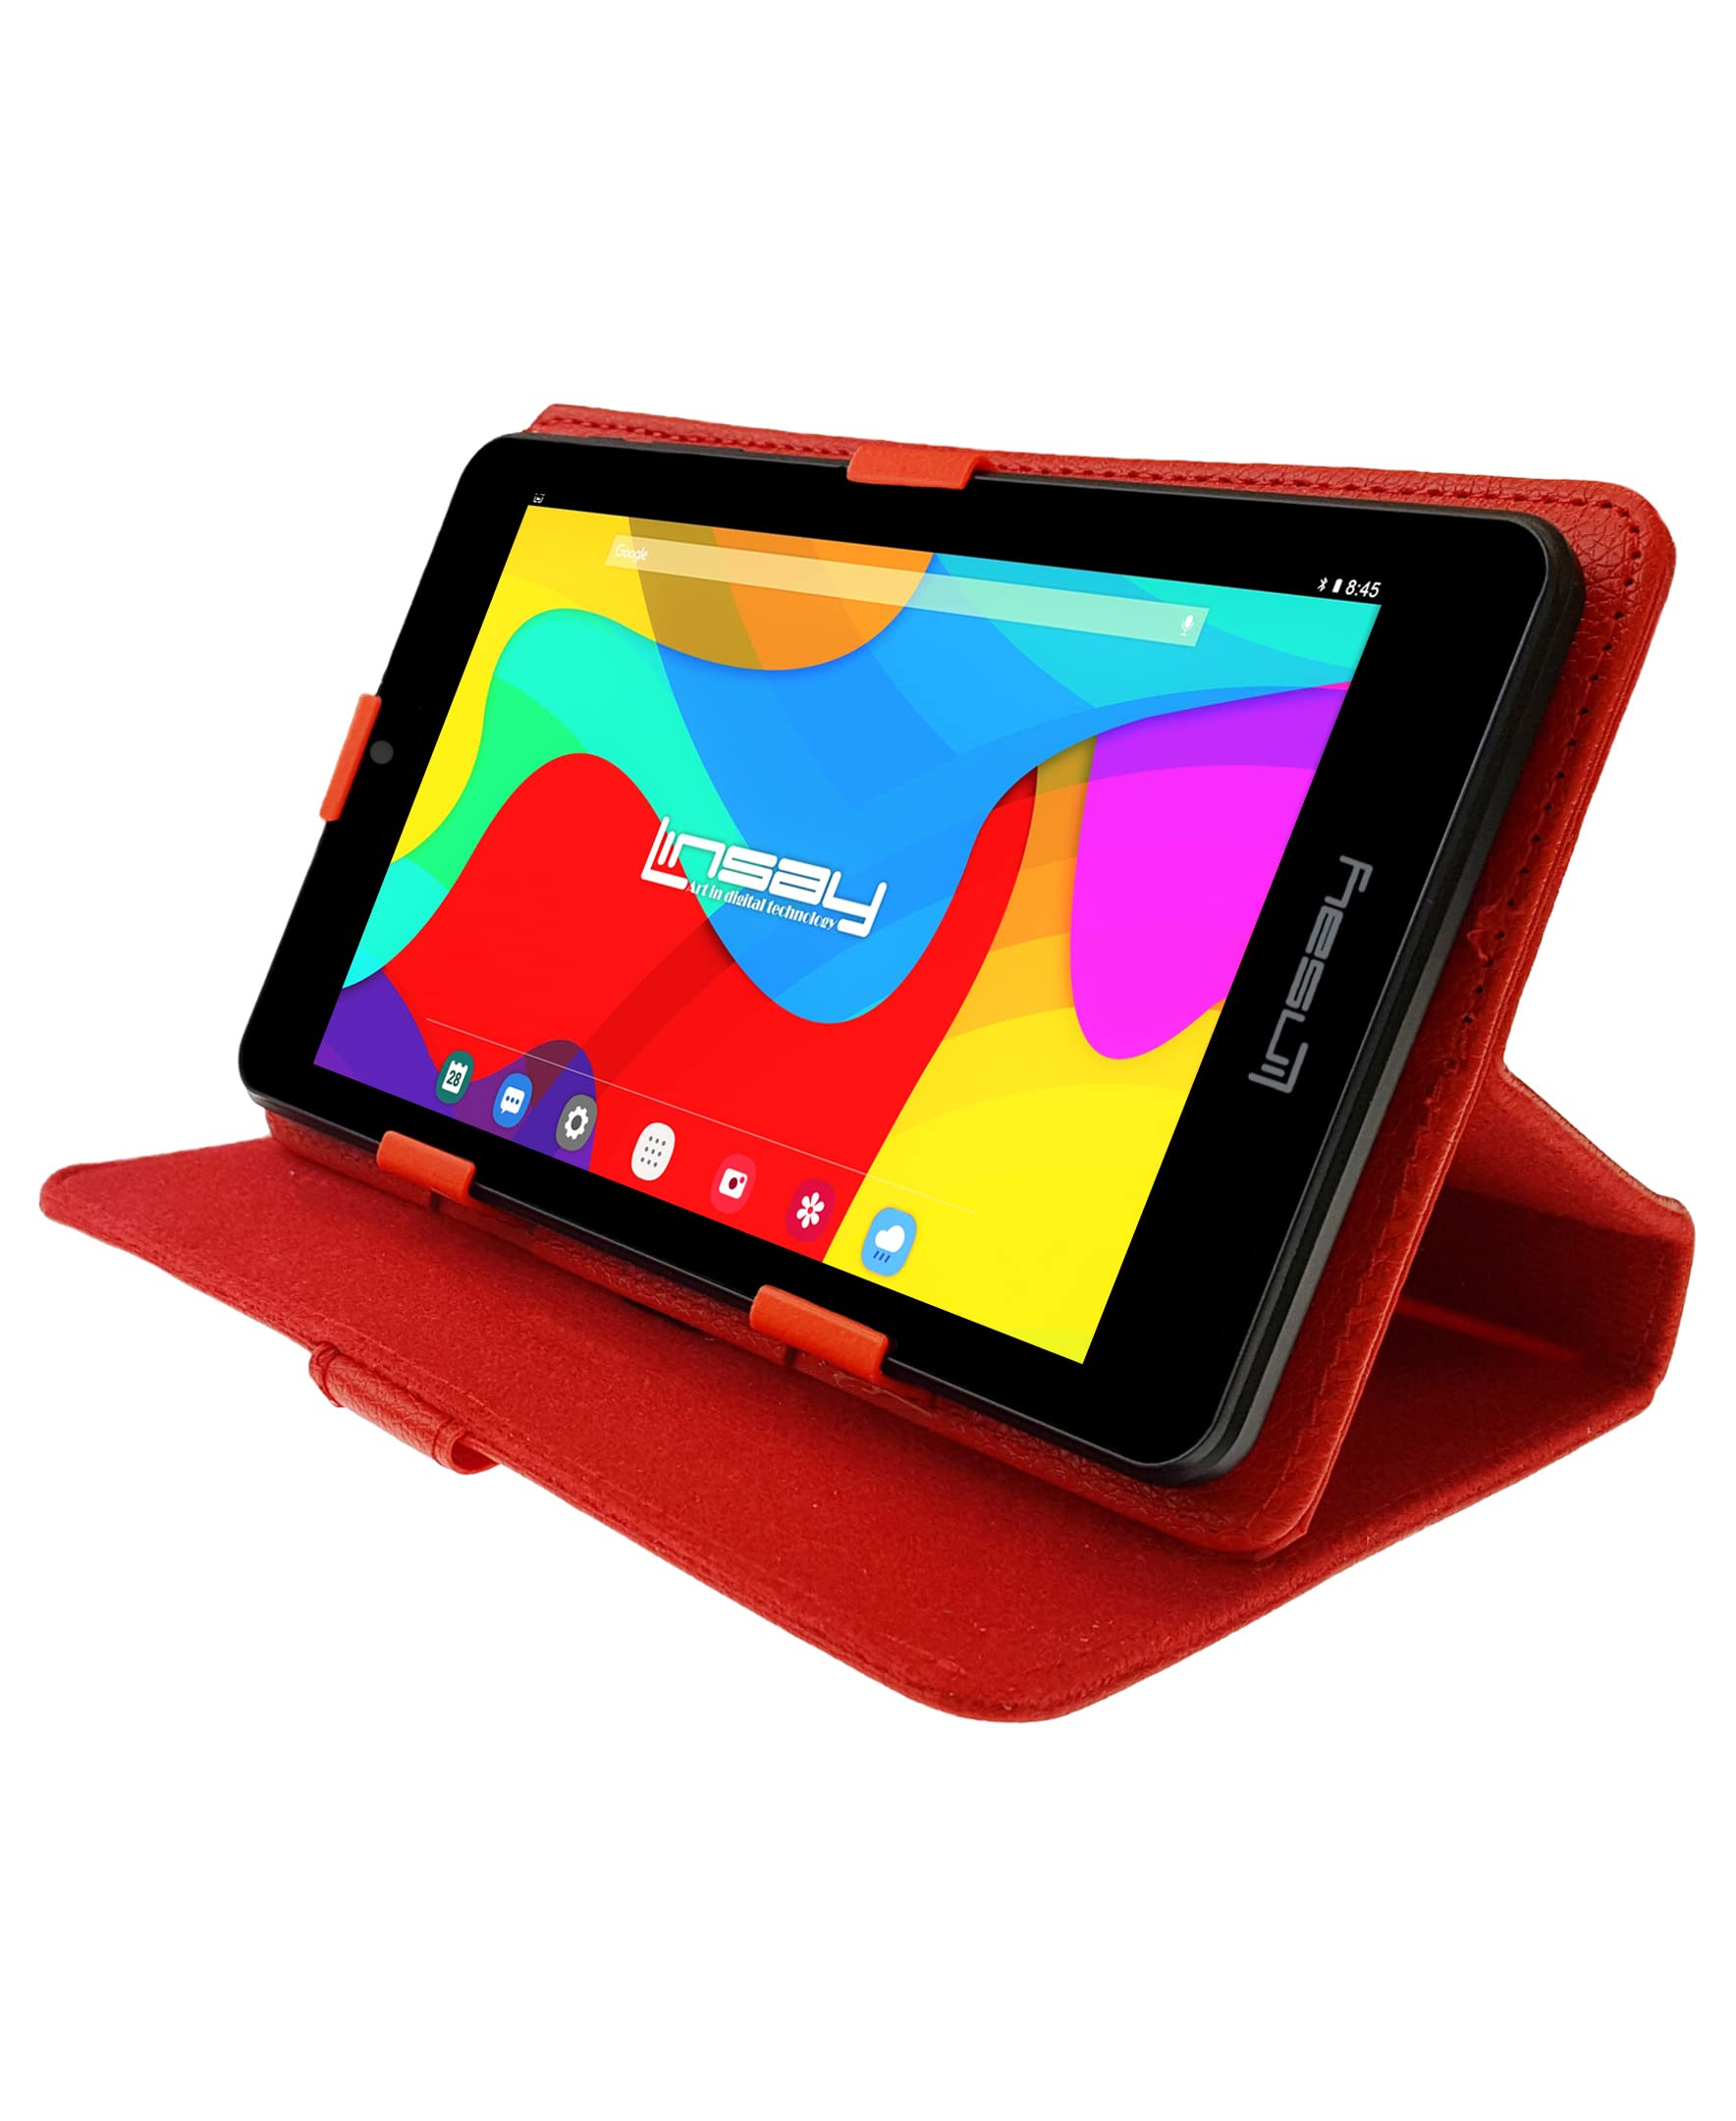 LINSAY 7" 2GB RAM 32GB Storage Android 12 Tablet with Red Leather Case, Pop Holder and Pen Stylus